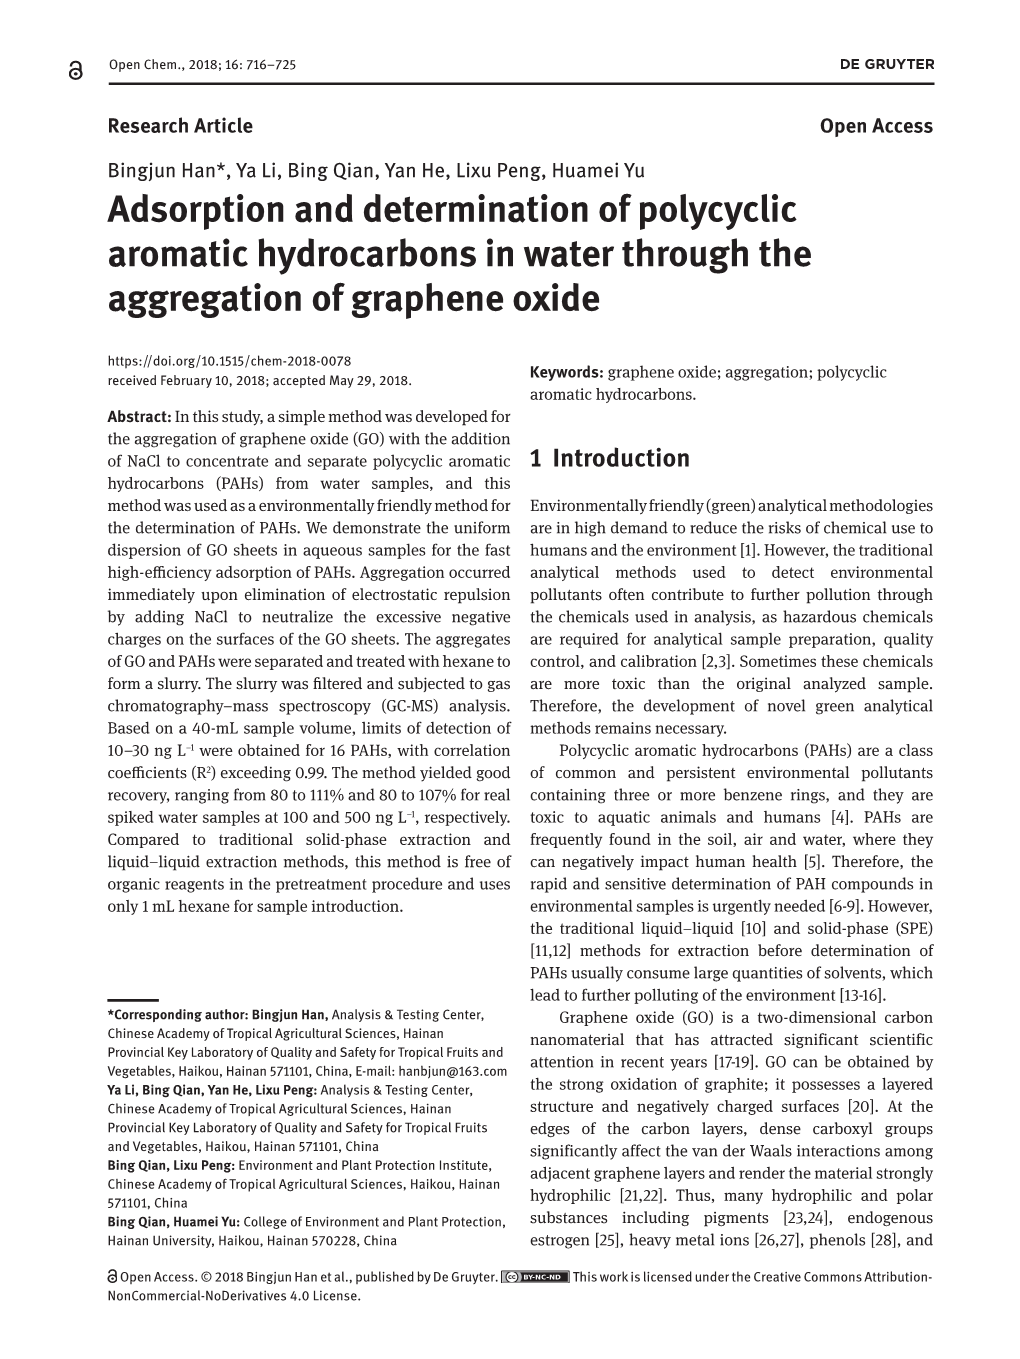 Adsorption and Determination of Polycyclic Aromatic Hydrocarbons in Water Through